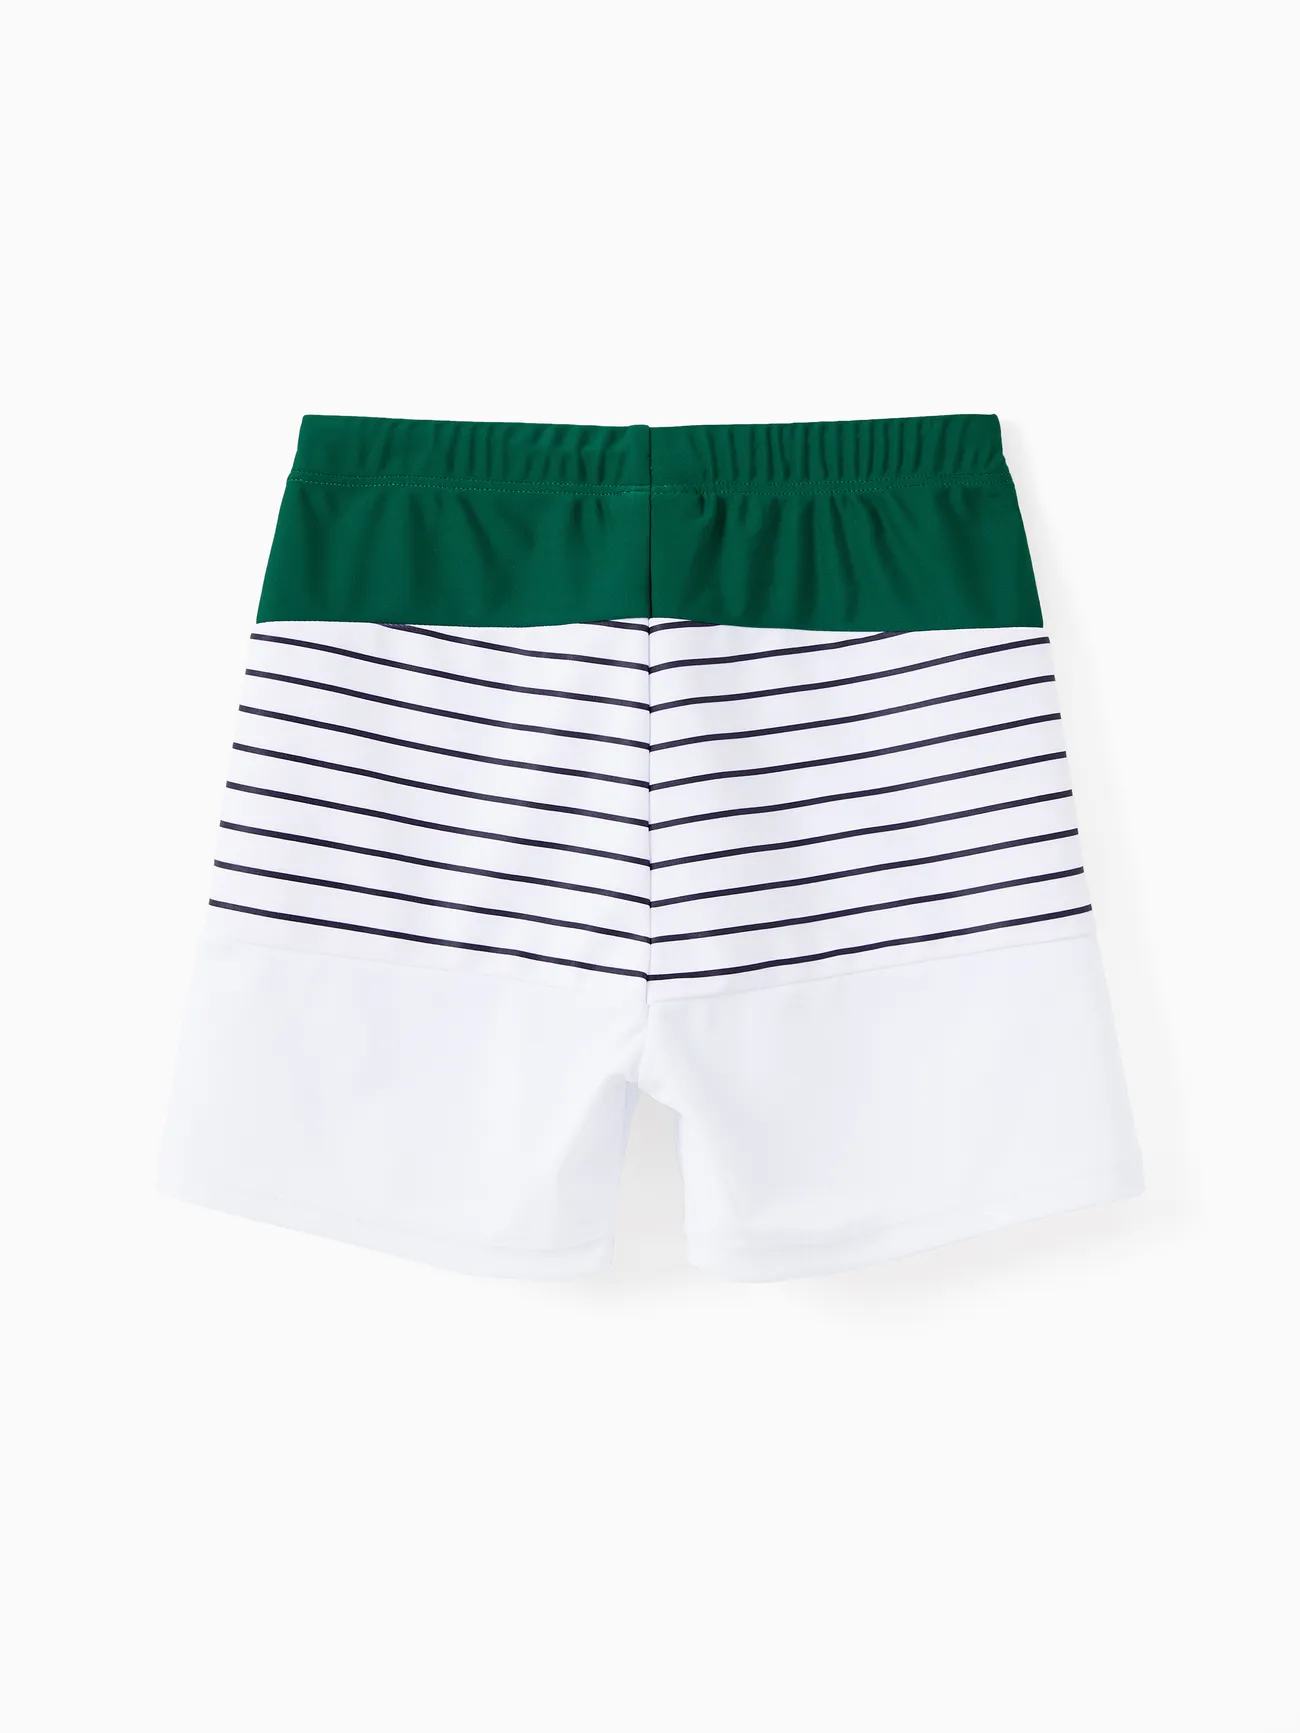 Family Matching Color Block Drawstring Swim Trunks or Stripe Cross Front Two-Piece Swimsuit (Quick-Dry) Green big image 1